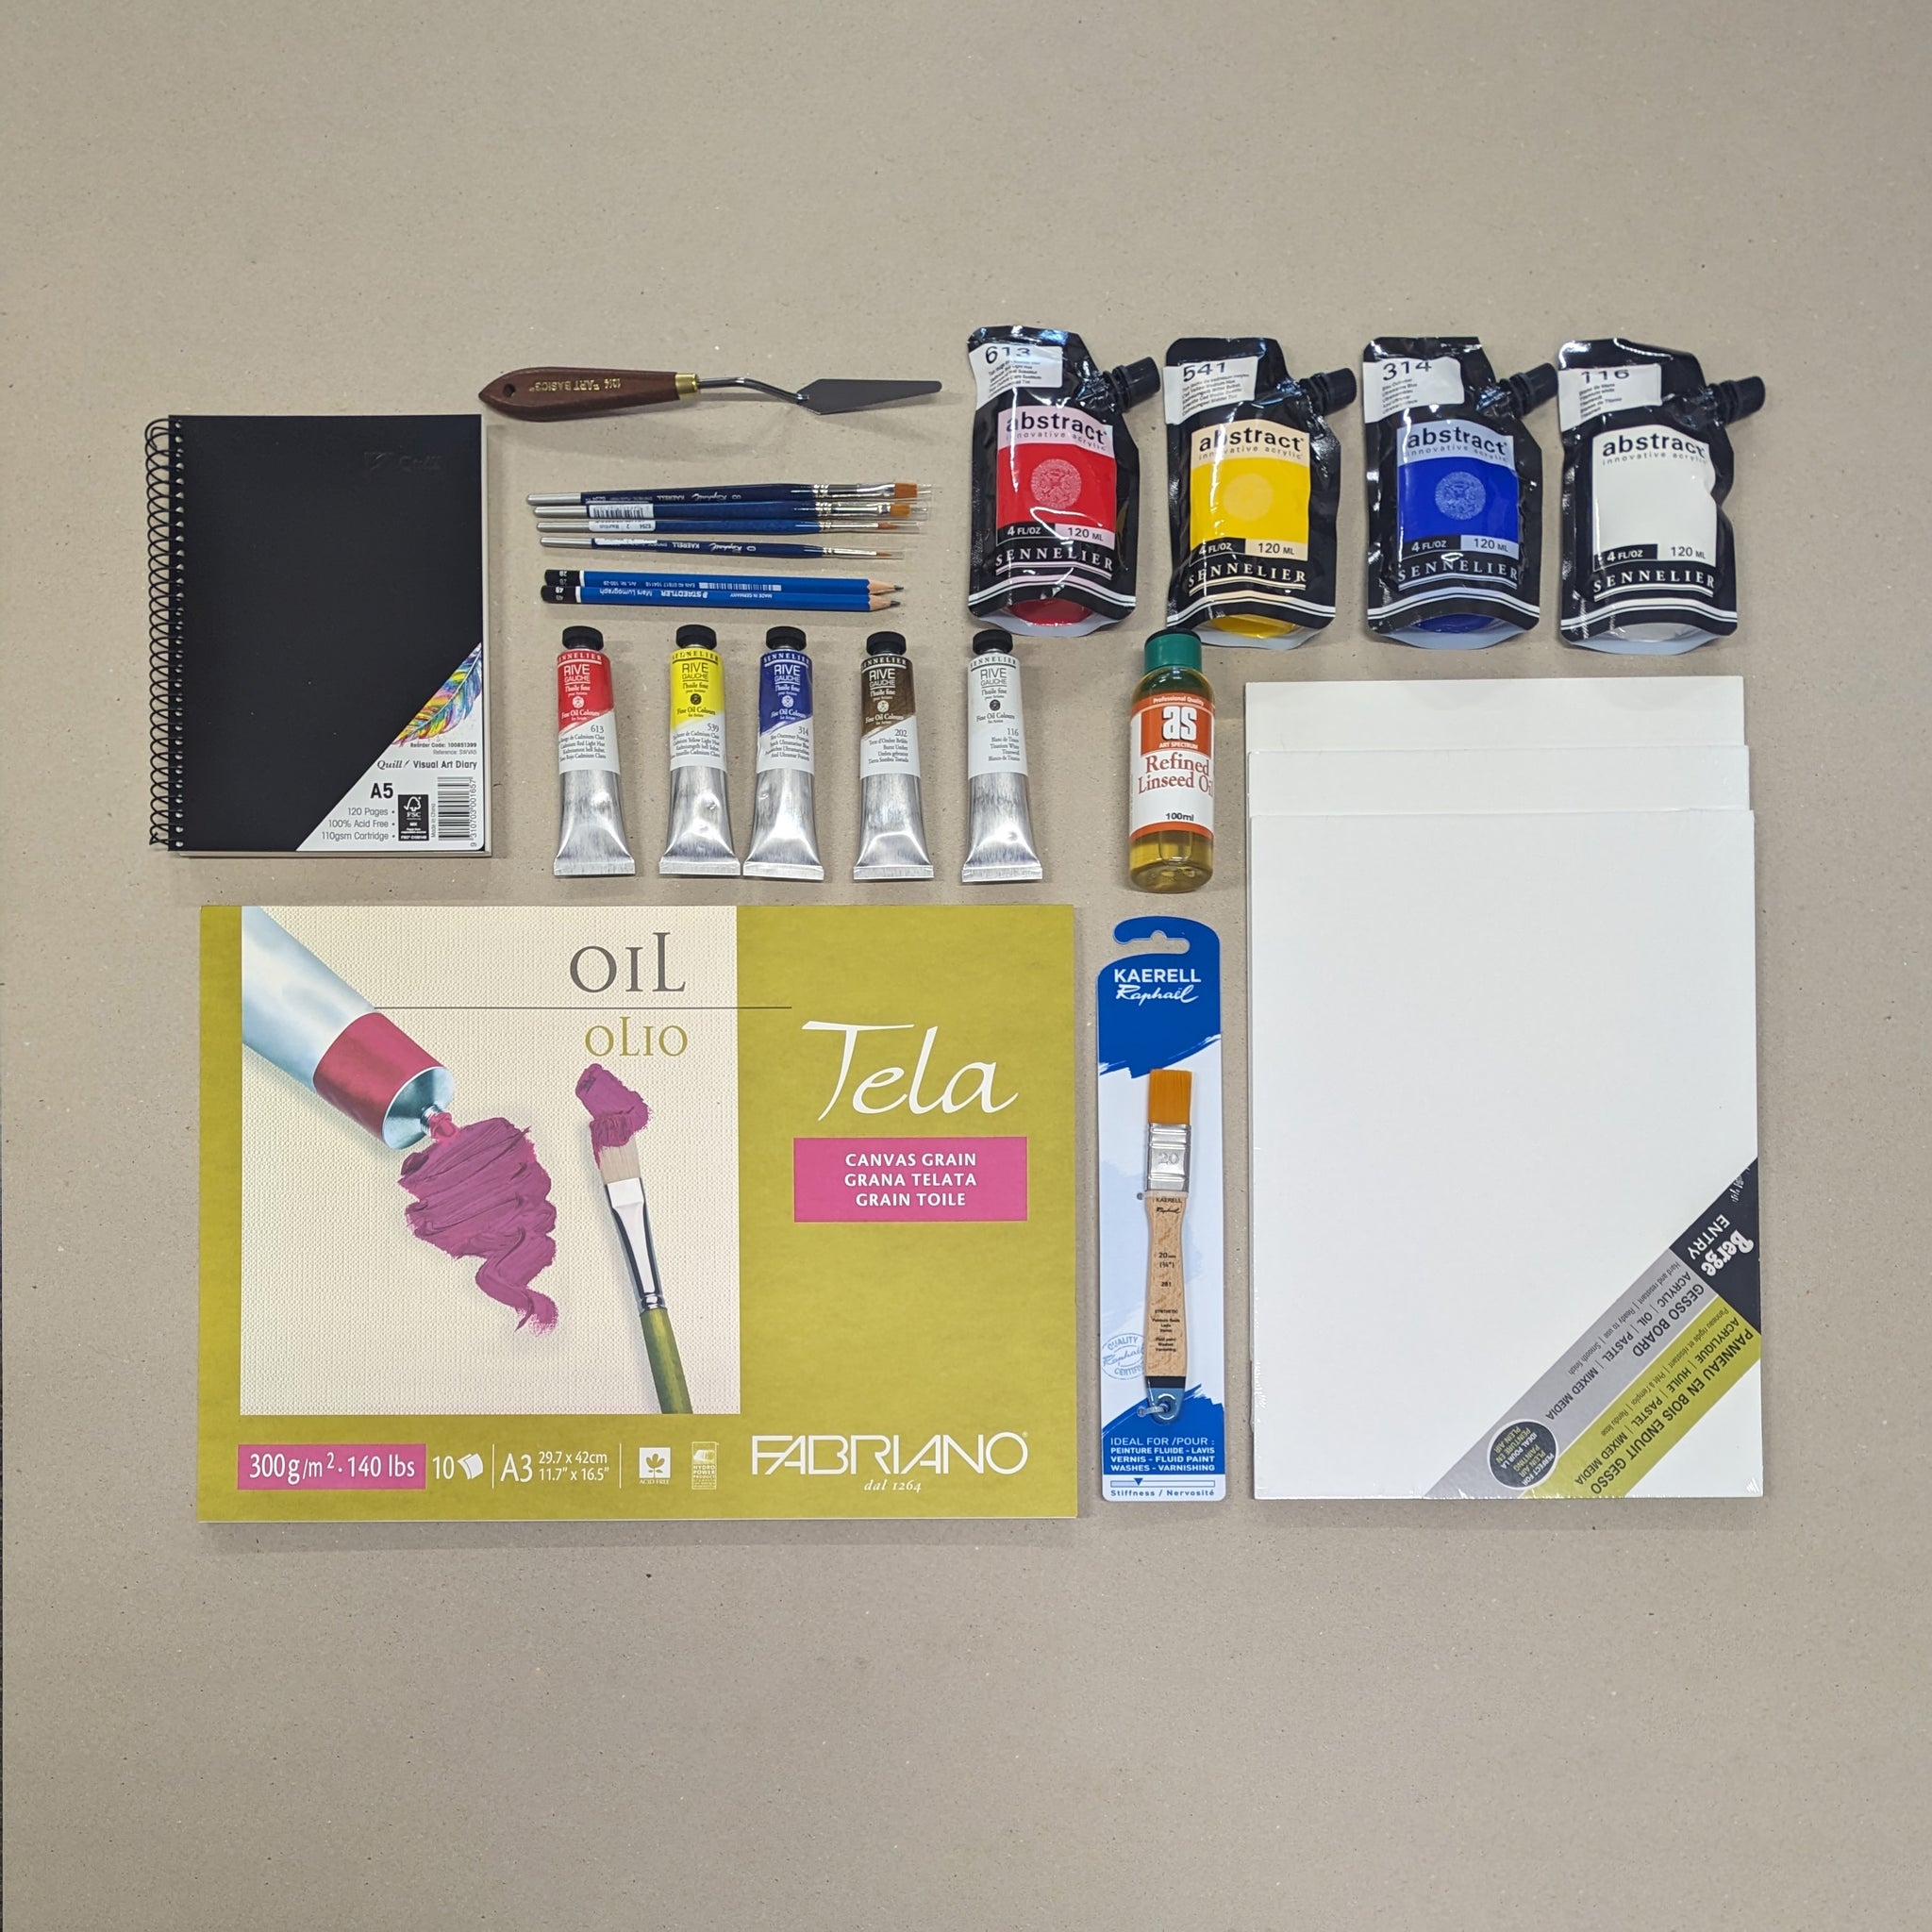 VCA Painting Techniques Materials Kit (FINA20026)